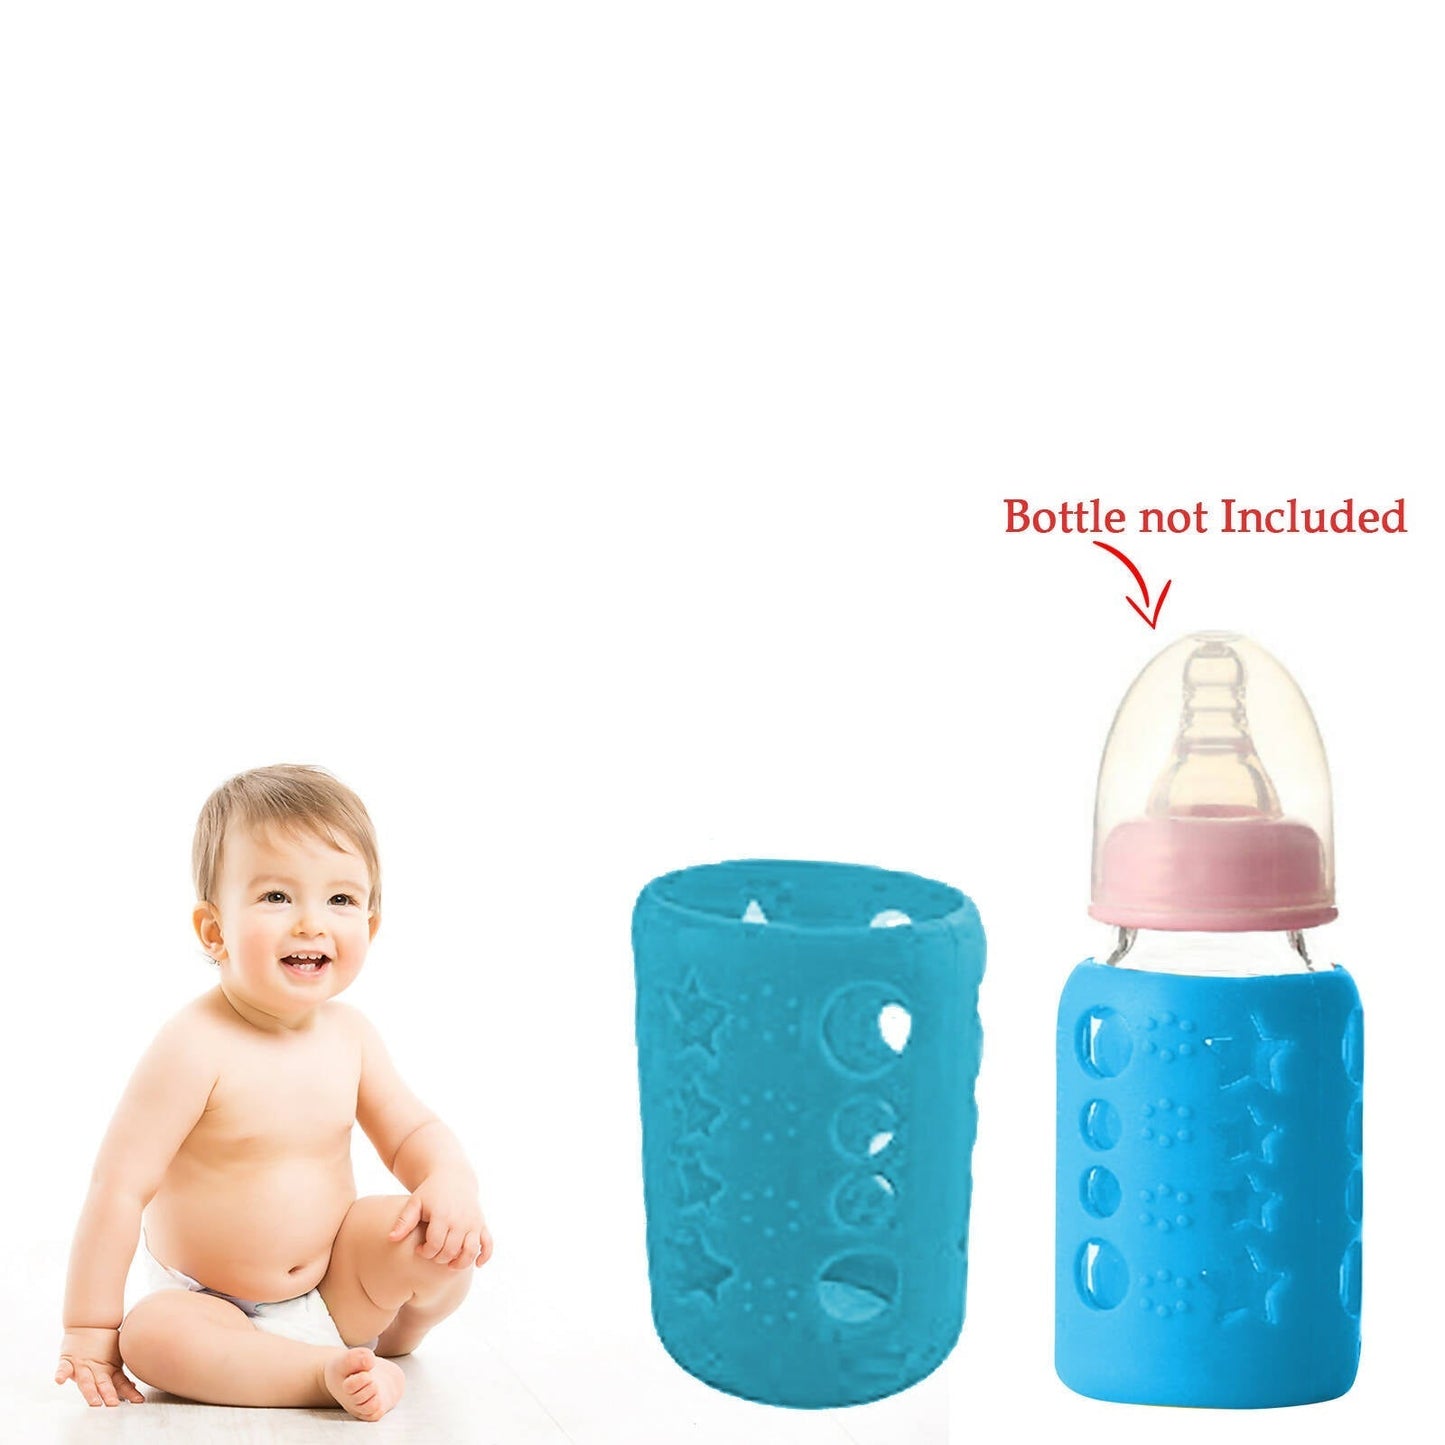 Safe-O-Kid Silicone Baby Feeding Bottle Cover Cum Sleeve for Insulated Protection 120mL- Blue